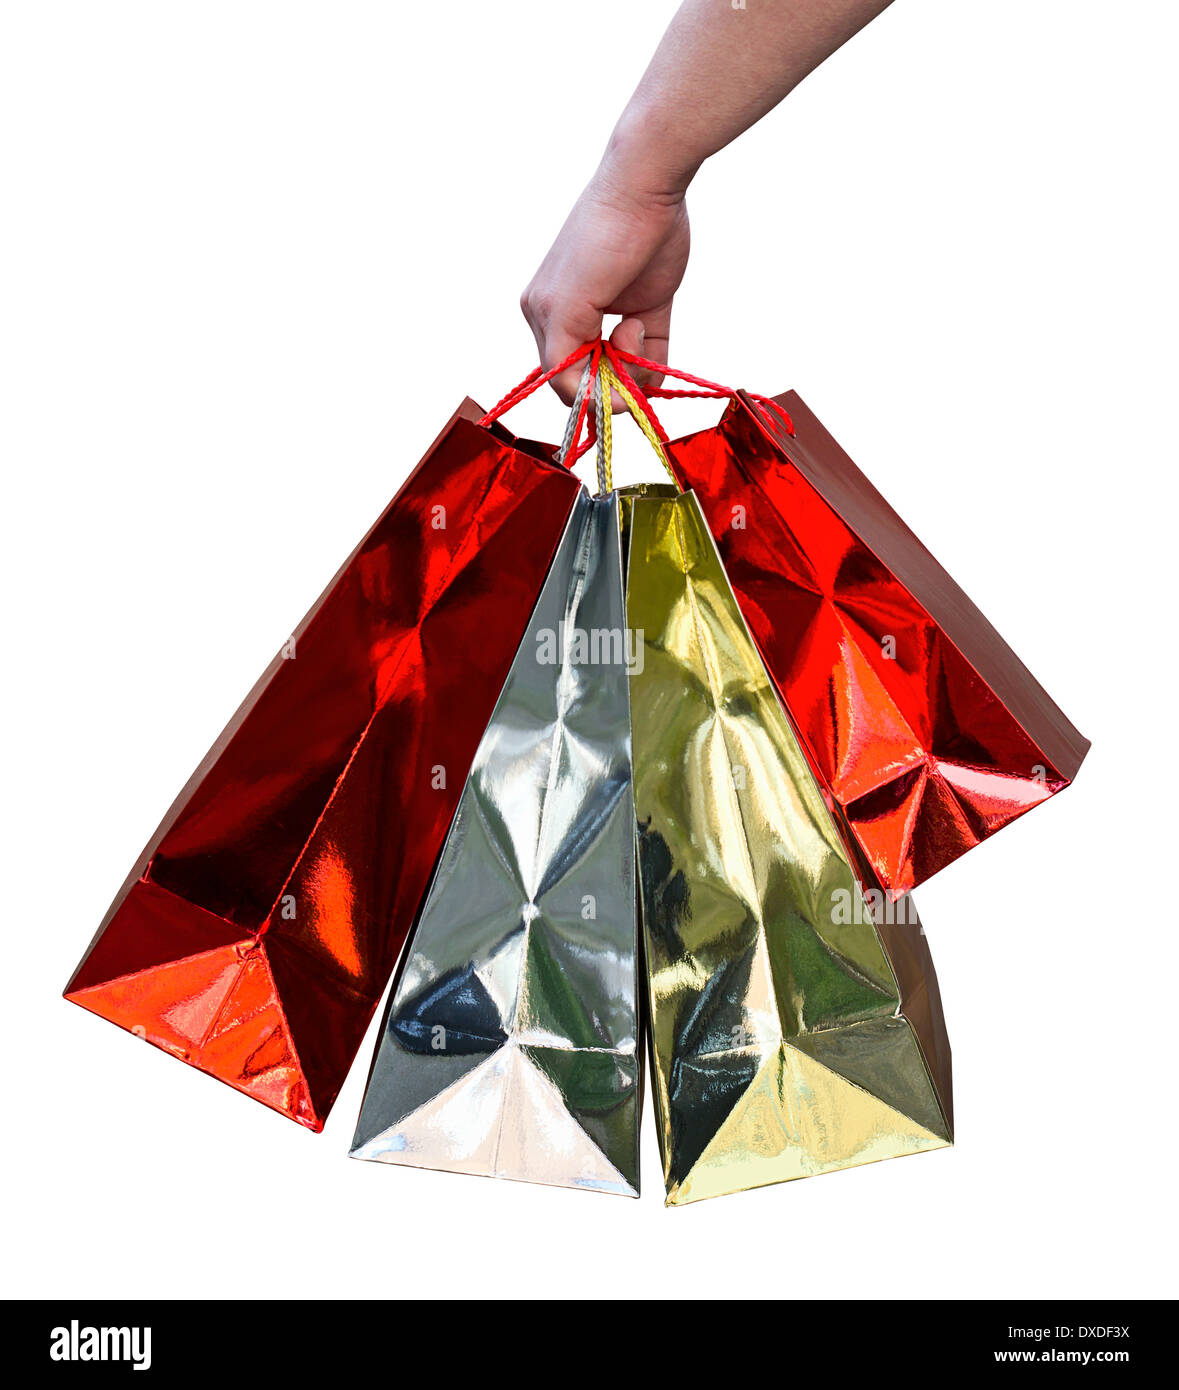 Hand carrying red and gold shiny gift bags of shopping purchased from a mall Stock Photo